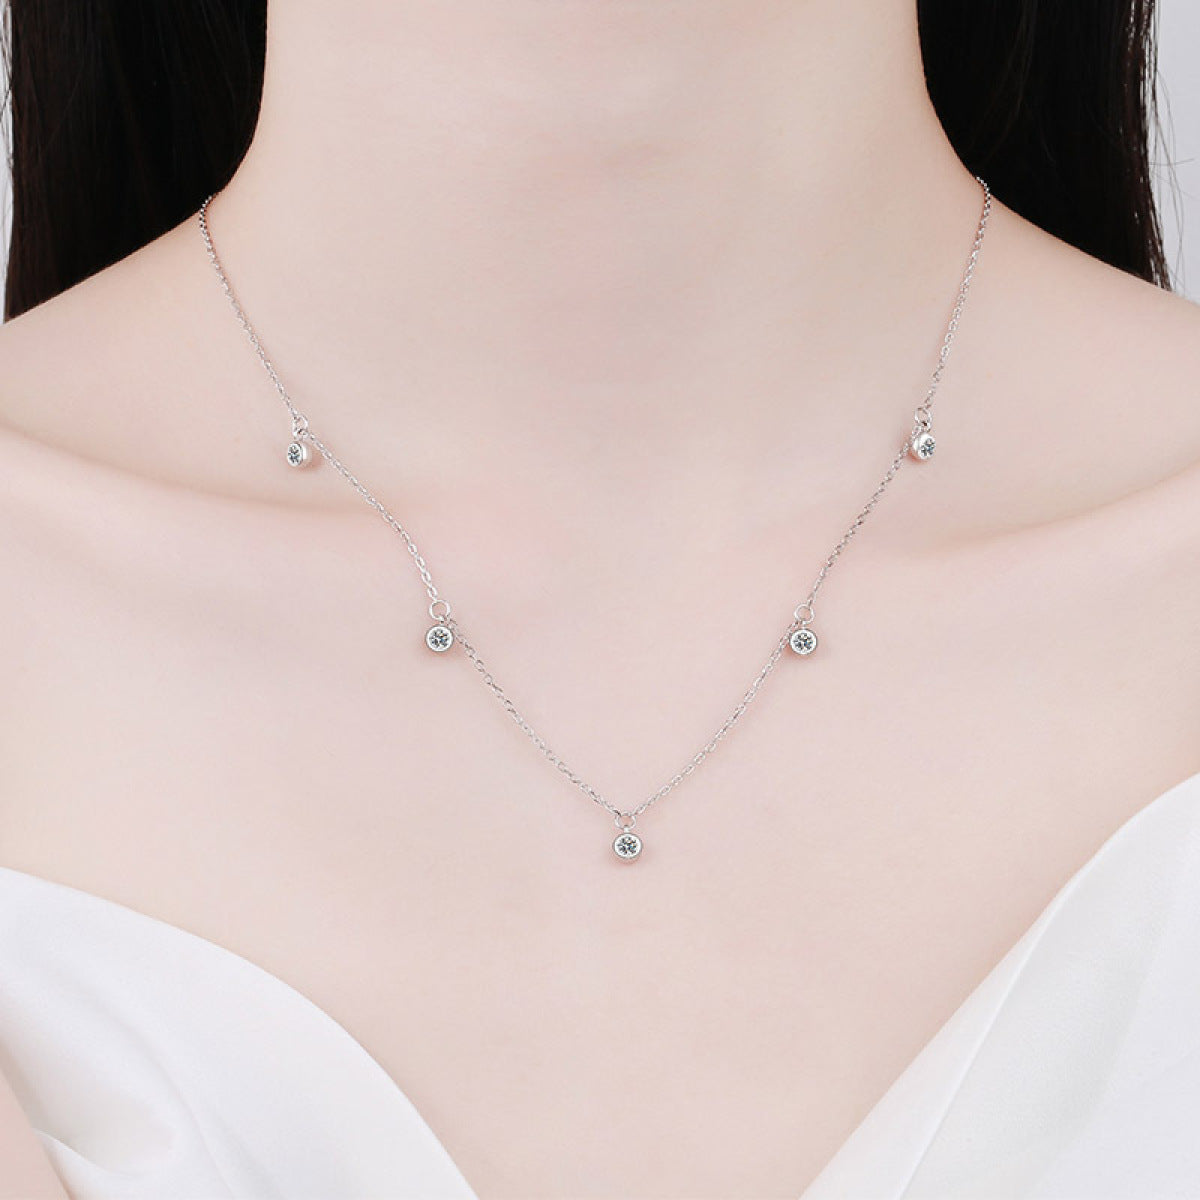 Starry Moissanite  Necklace - 925 Sterling Silver